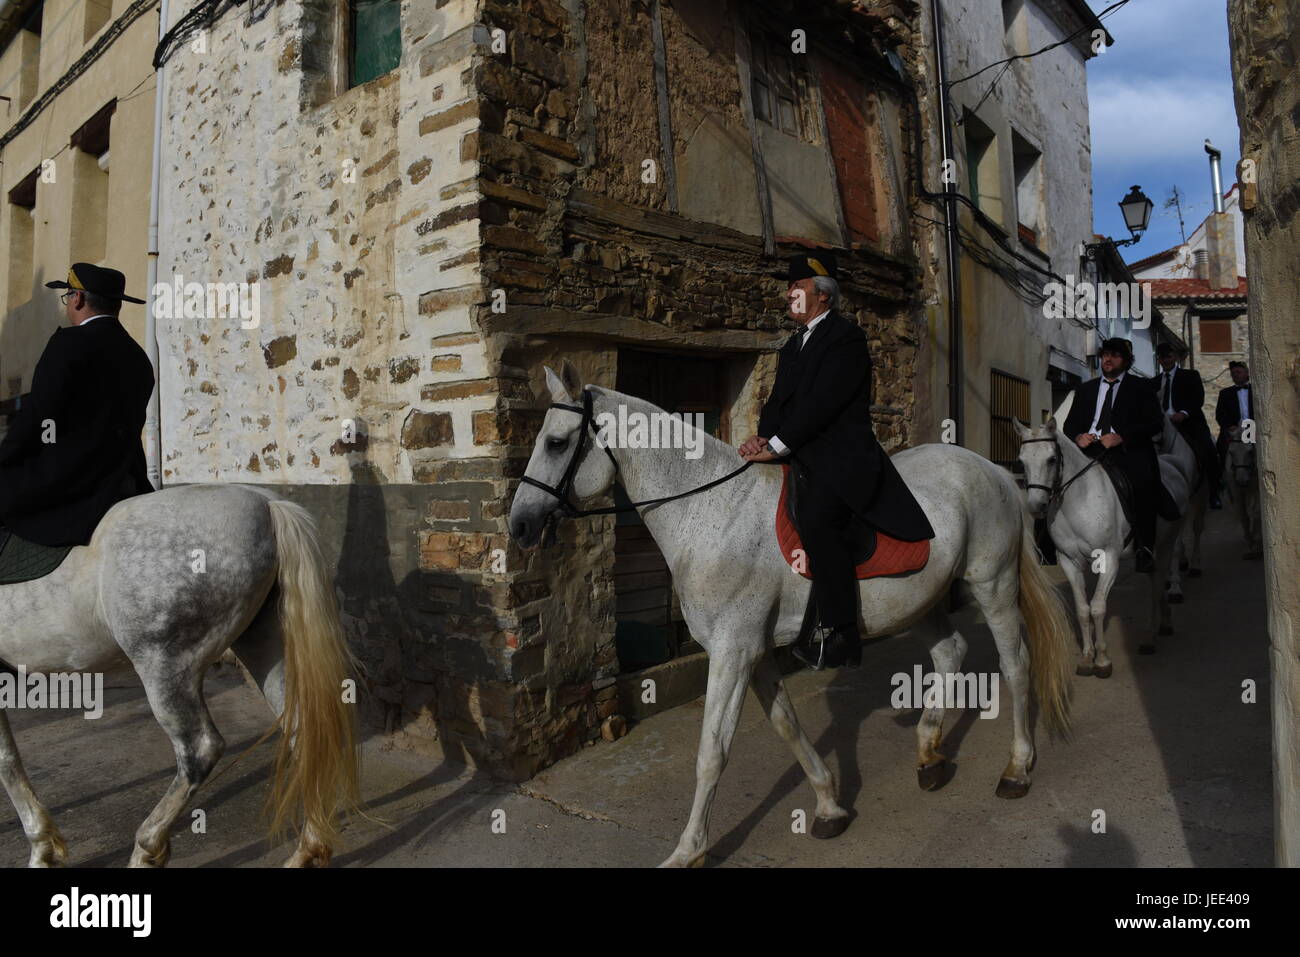 San Pedro Manrique, Spain. 24th June, 2017. A group of men, dressed in traditional costume, ride horses during the celebration of the ancient tradition of 'La Descubierta' in San Pedro Manrique, northern Spain. Credit: Jorge Sanz/Pacific Press/Alamy Live News Stock Photo